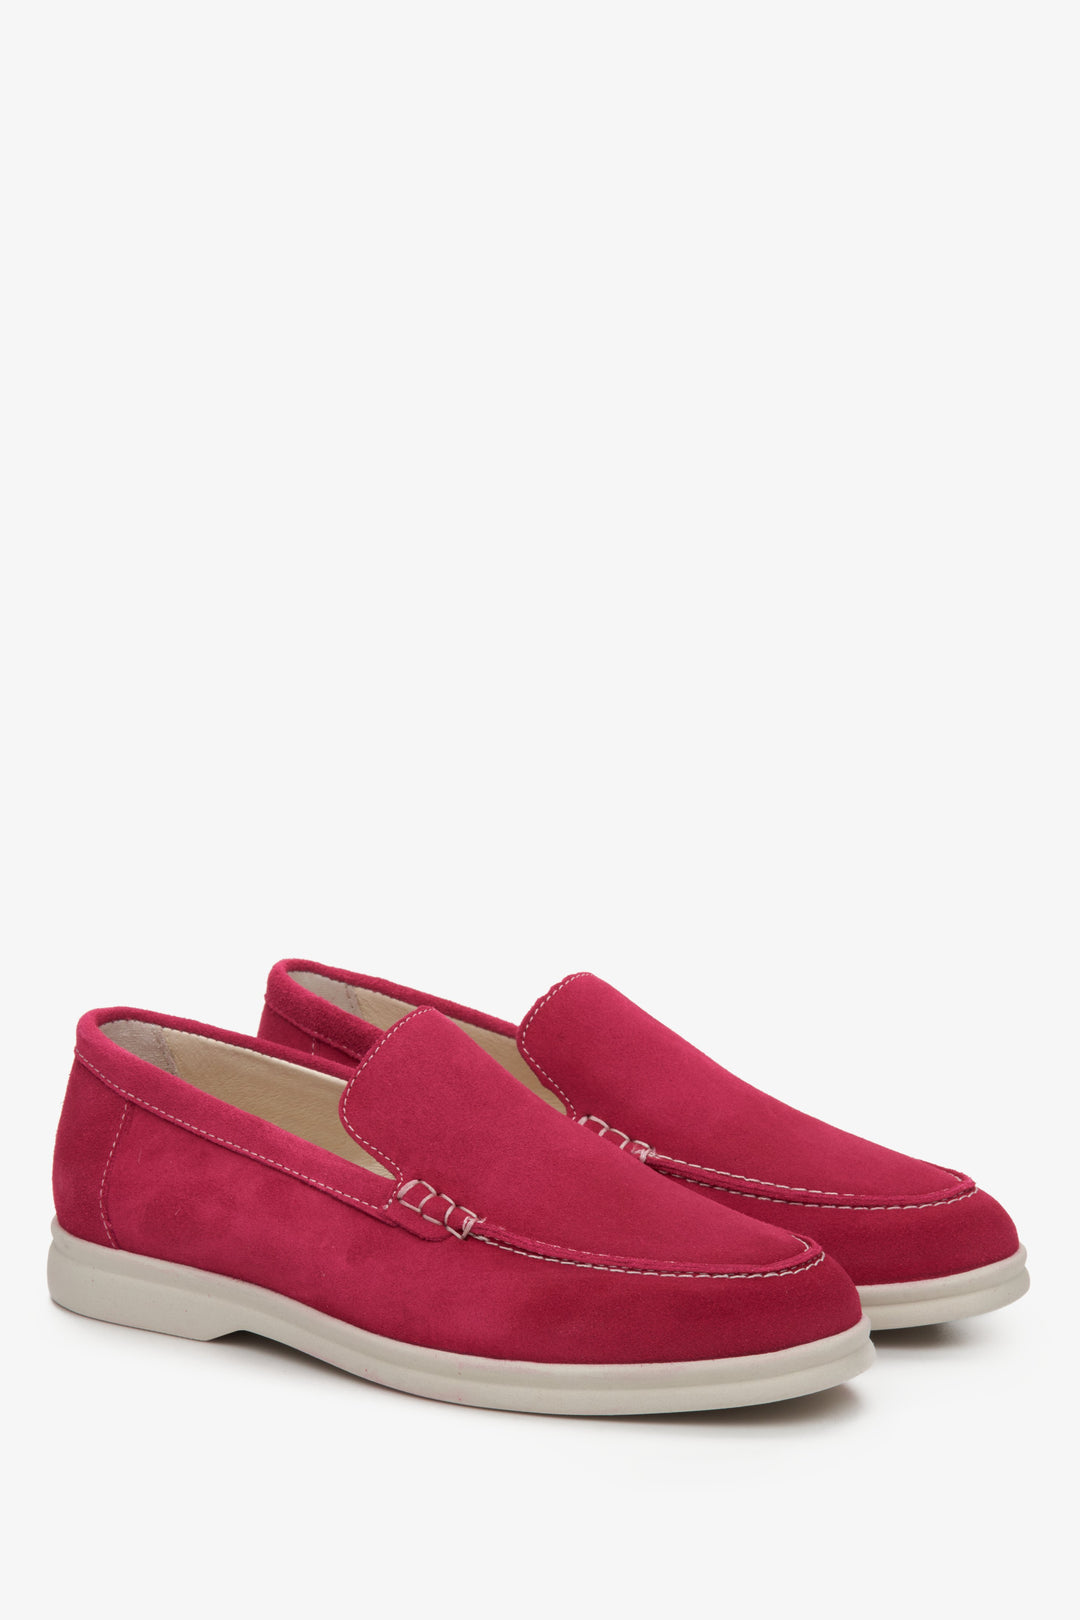 Women's suede loafers in pink Estro - presentation of the sideline and white sole.